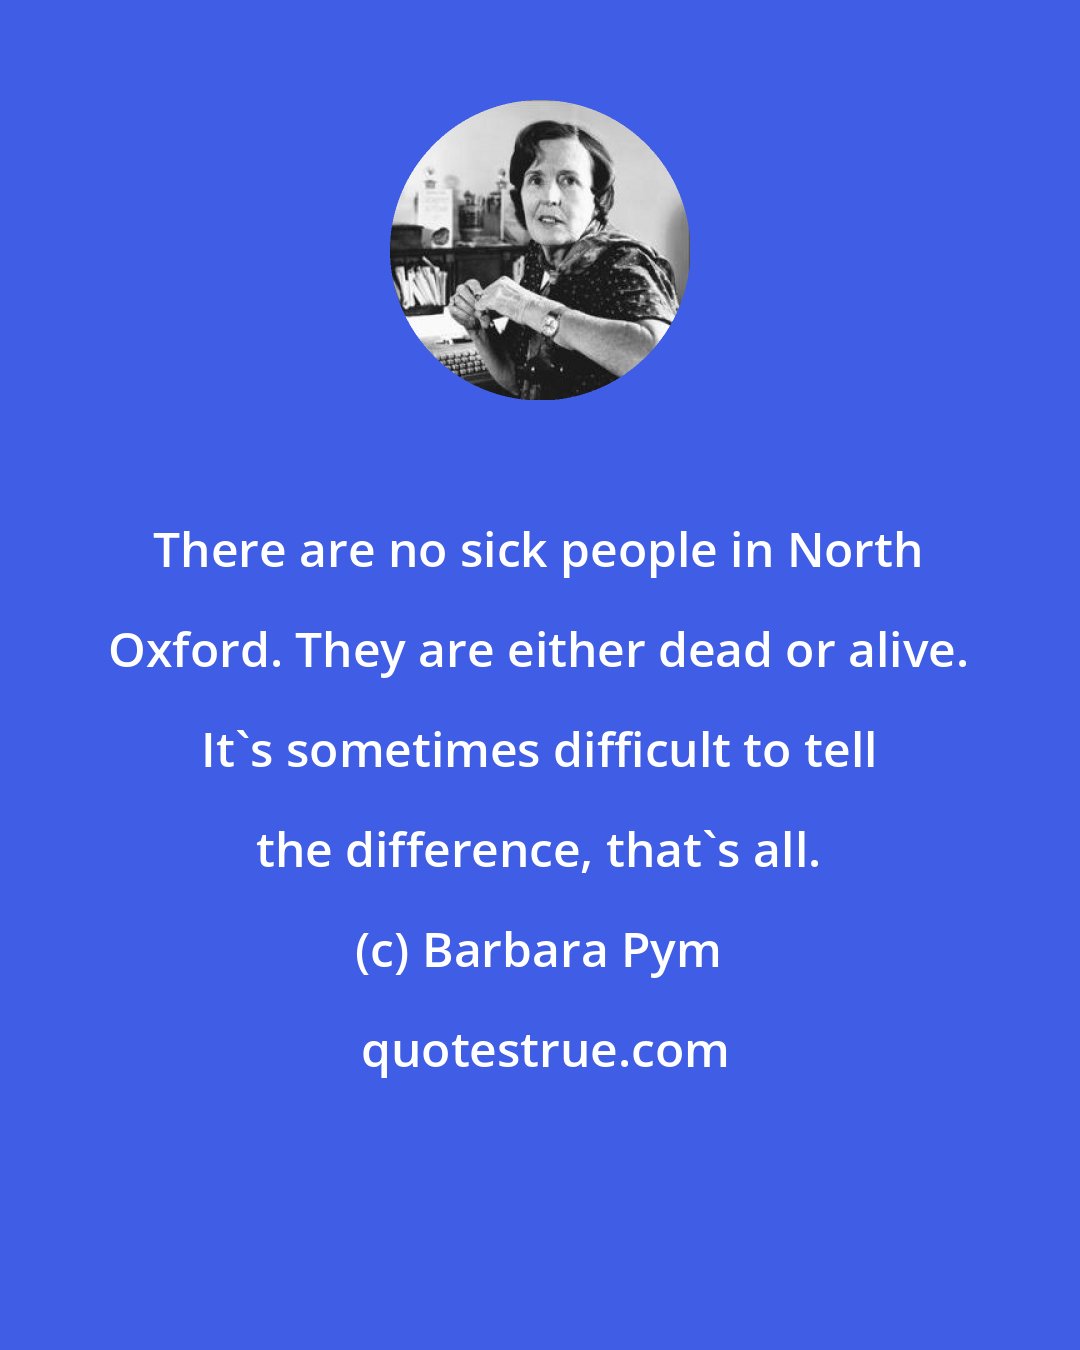 Barbara Pym: There are no sick people in North Oxford. They are either dead or alive. It's sometimes difficult to tell the difference, that's all.